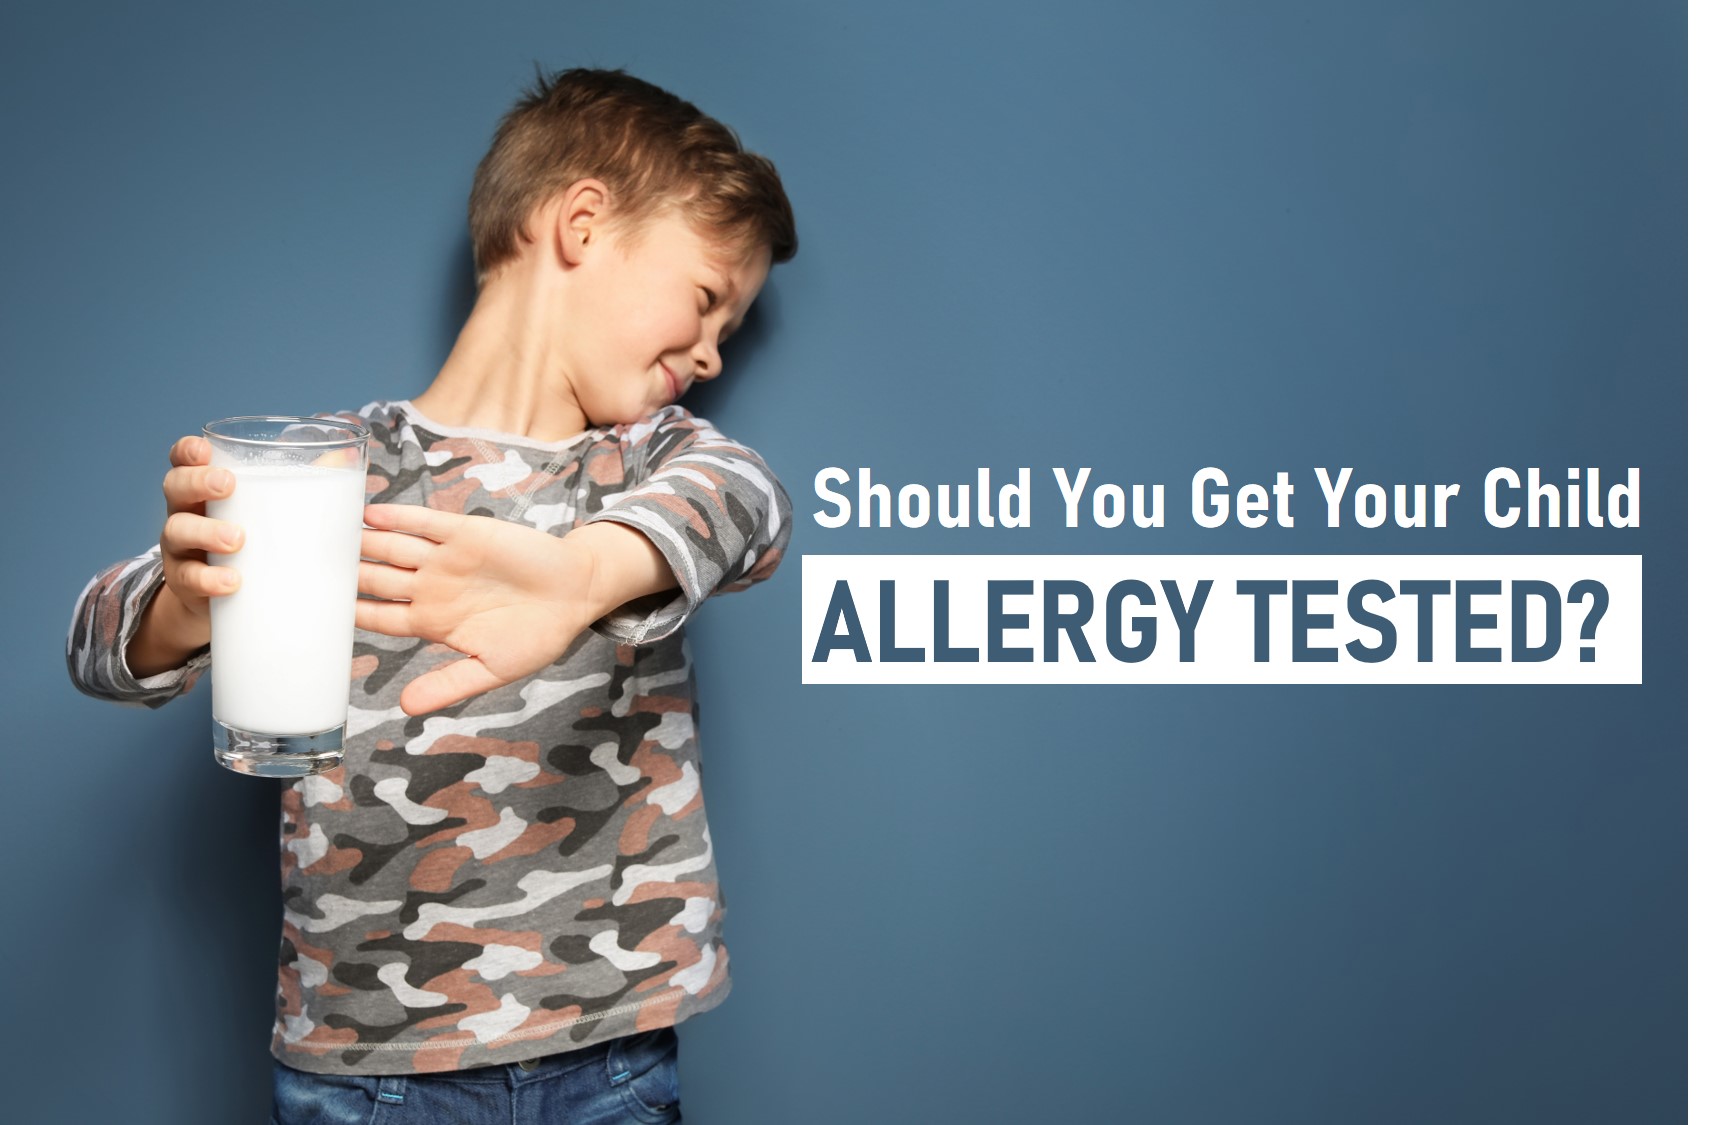 Should You Get Your Child Allergy Tested?